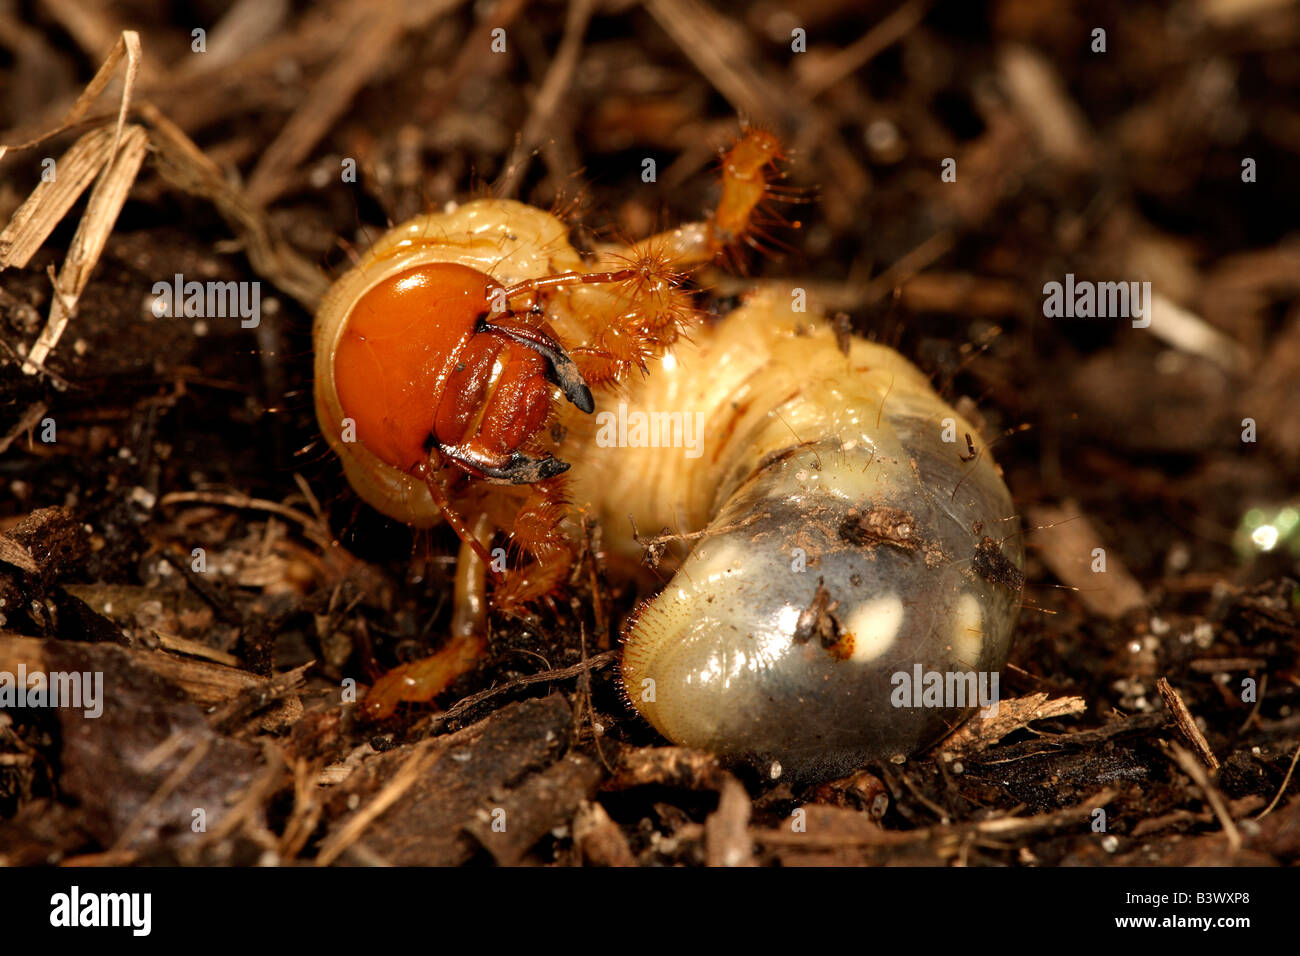 Underground living beetle larva (order Coleoptera), photographed on the south coast of New South Wales, Australia. Stock Photo